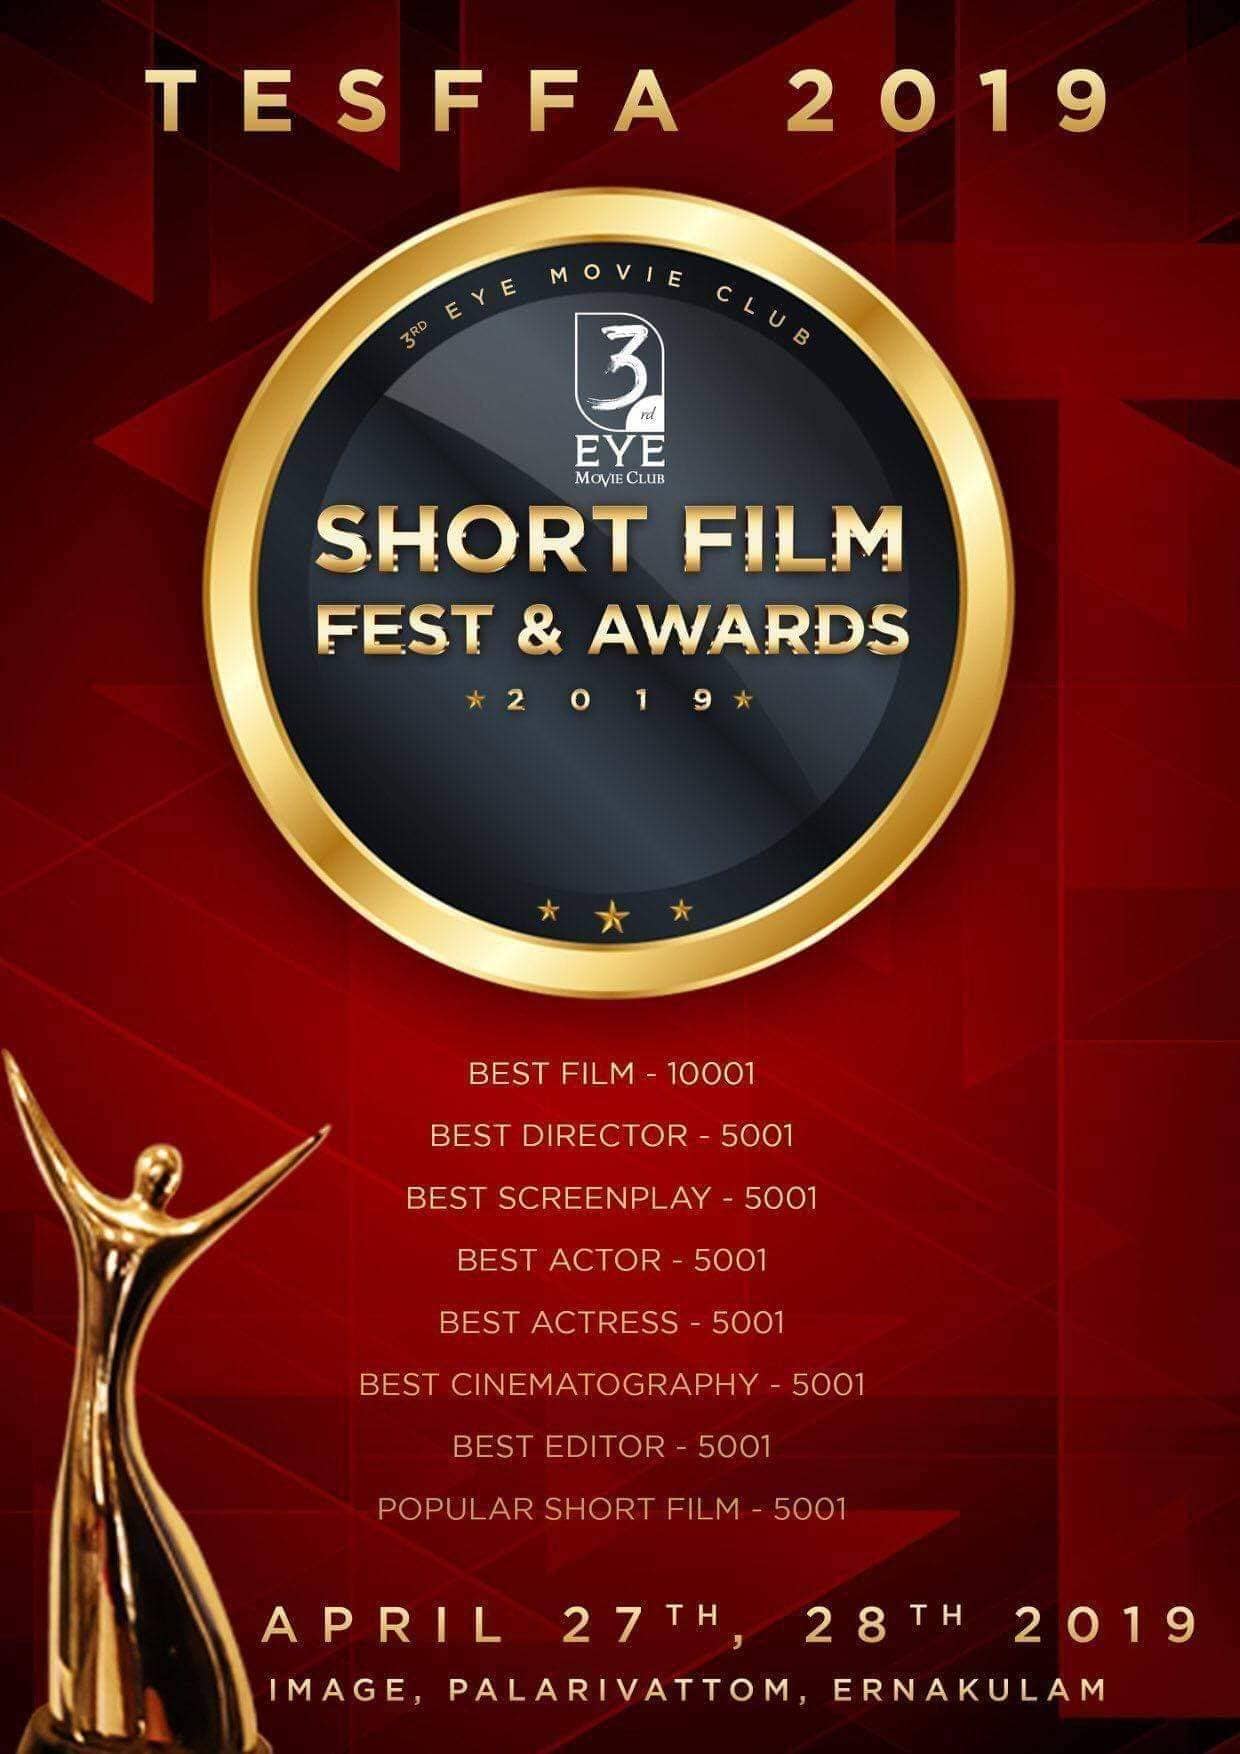 The 3rd Eye Short Film Festival and Awards (TESFFA) 2019 every reviews and ratings